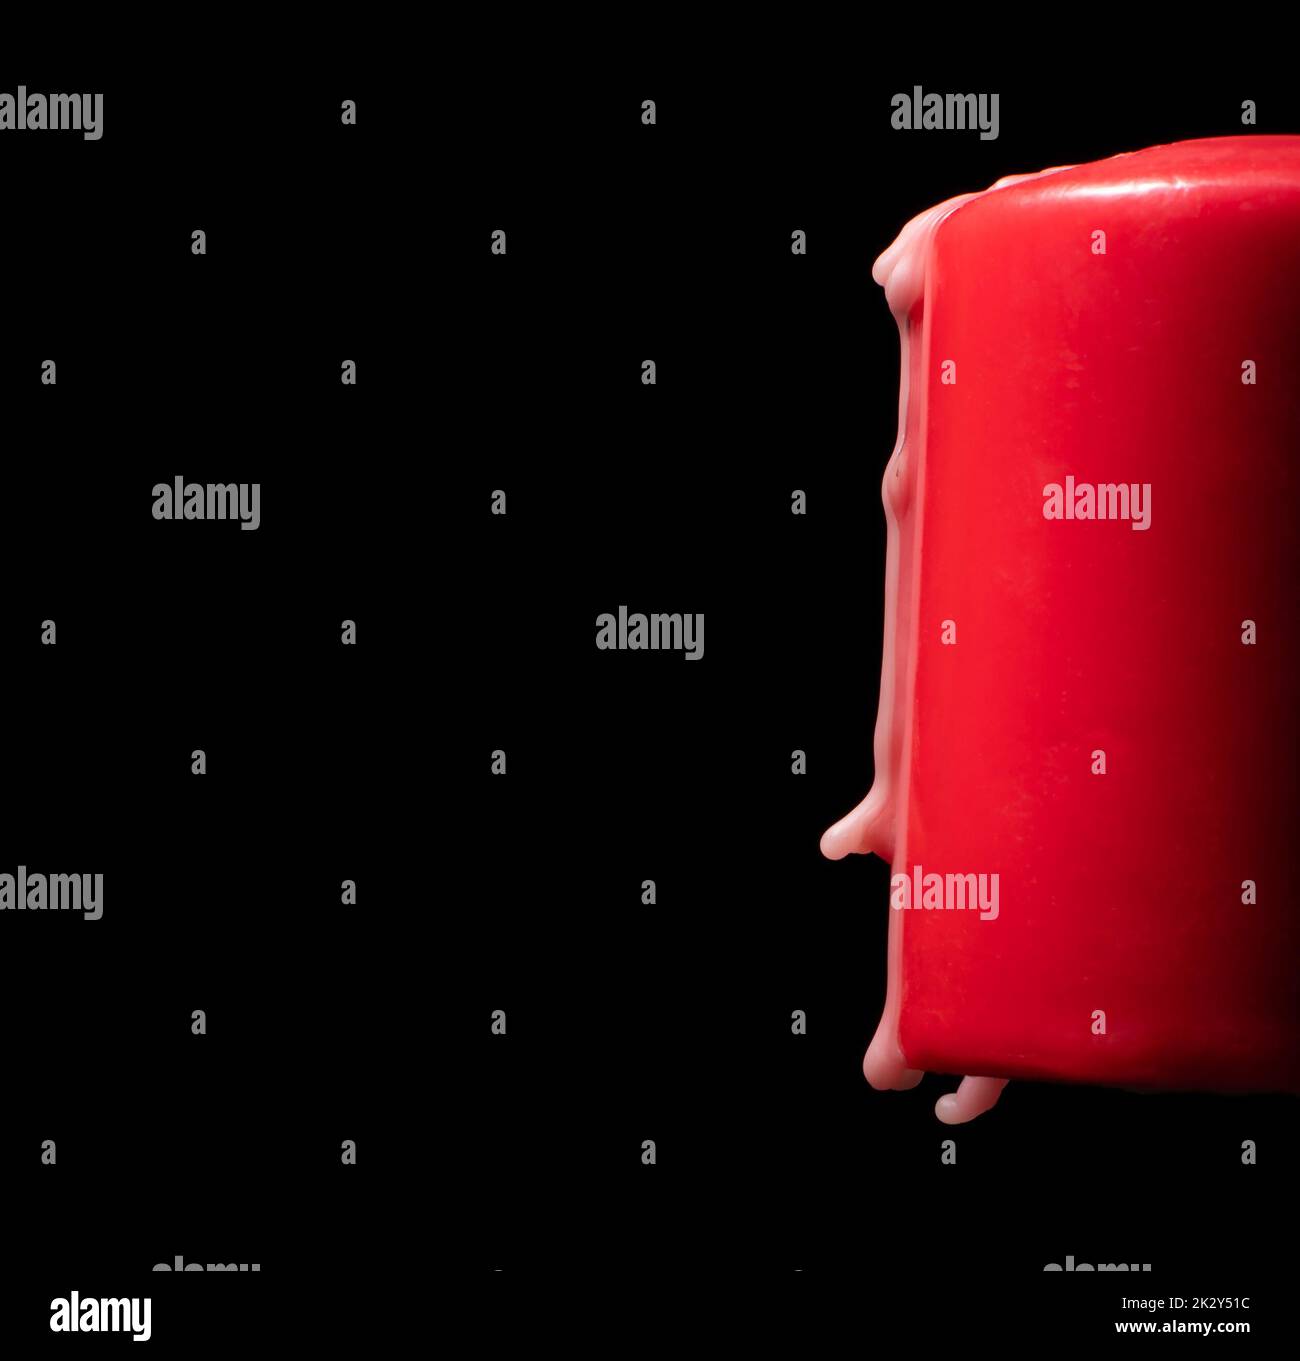 Wax dripping off a red candle on a black background Stock Photo